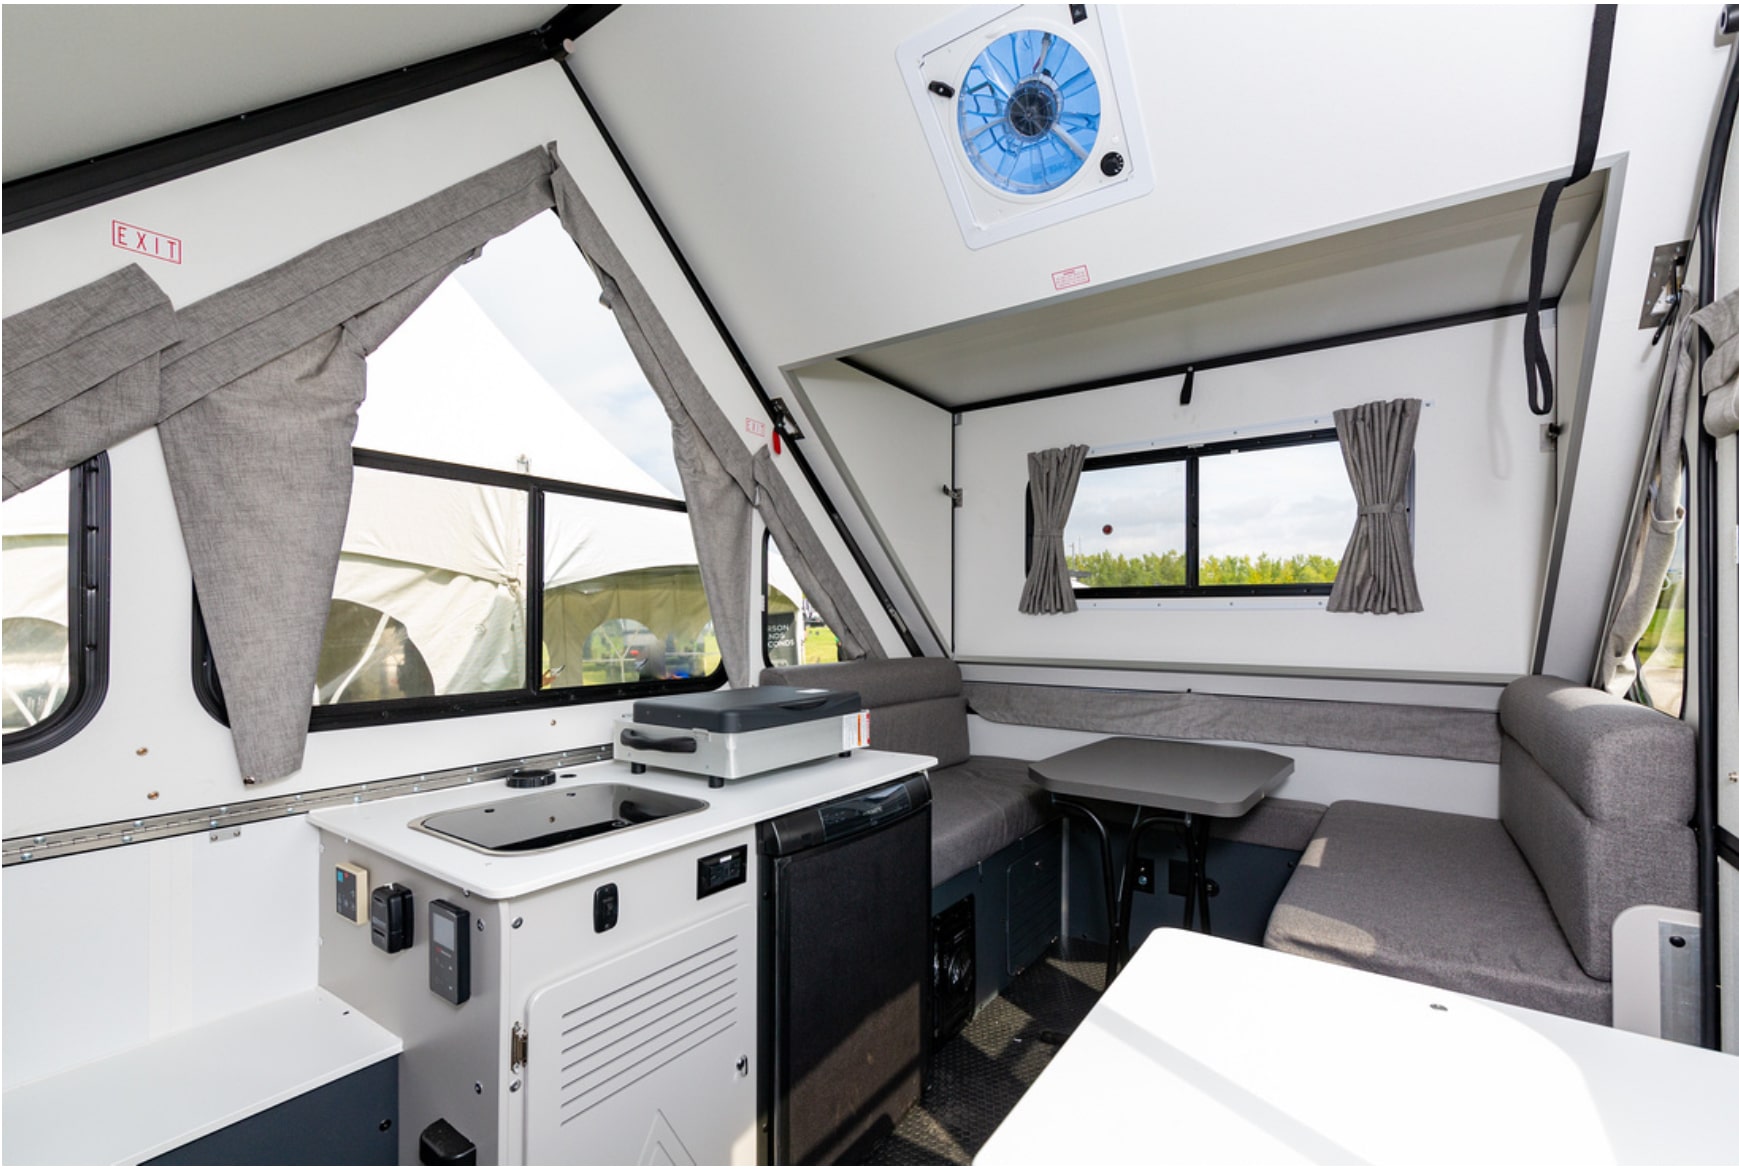 The interior of an rv with a kitchen and dining area.